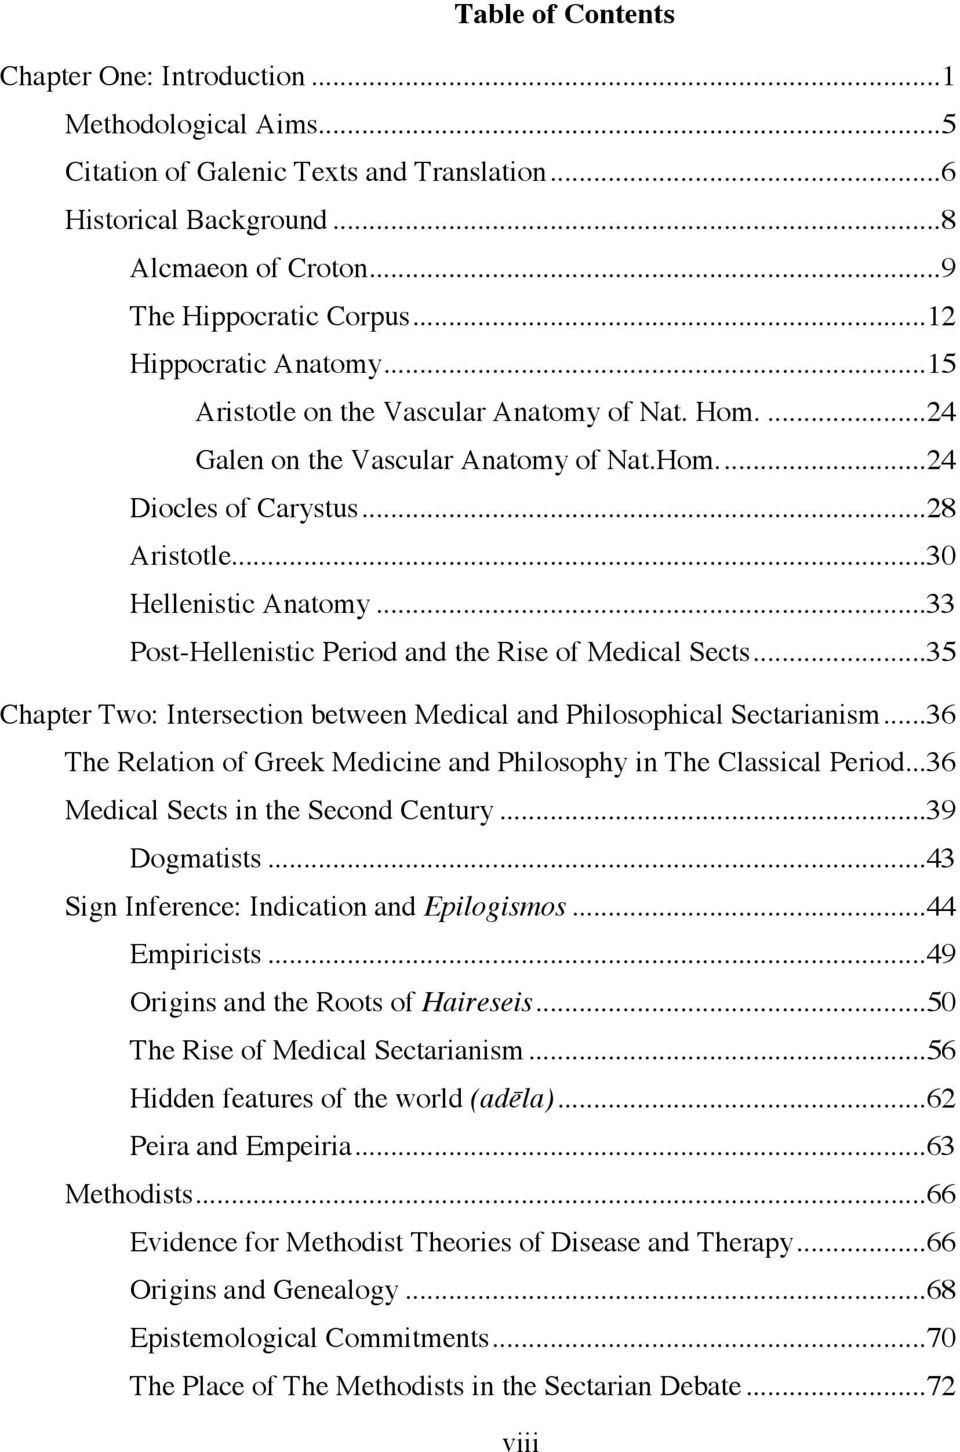 ..33 Post-Hellenistic Period and the Rise of Medical Sects...35 Chapter Two: Intersection between Medical and Philosophical Sectarianism.